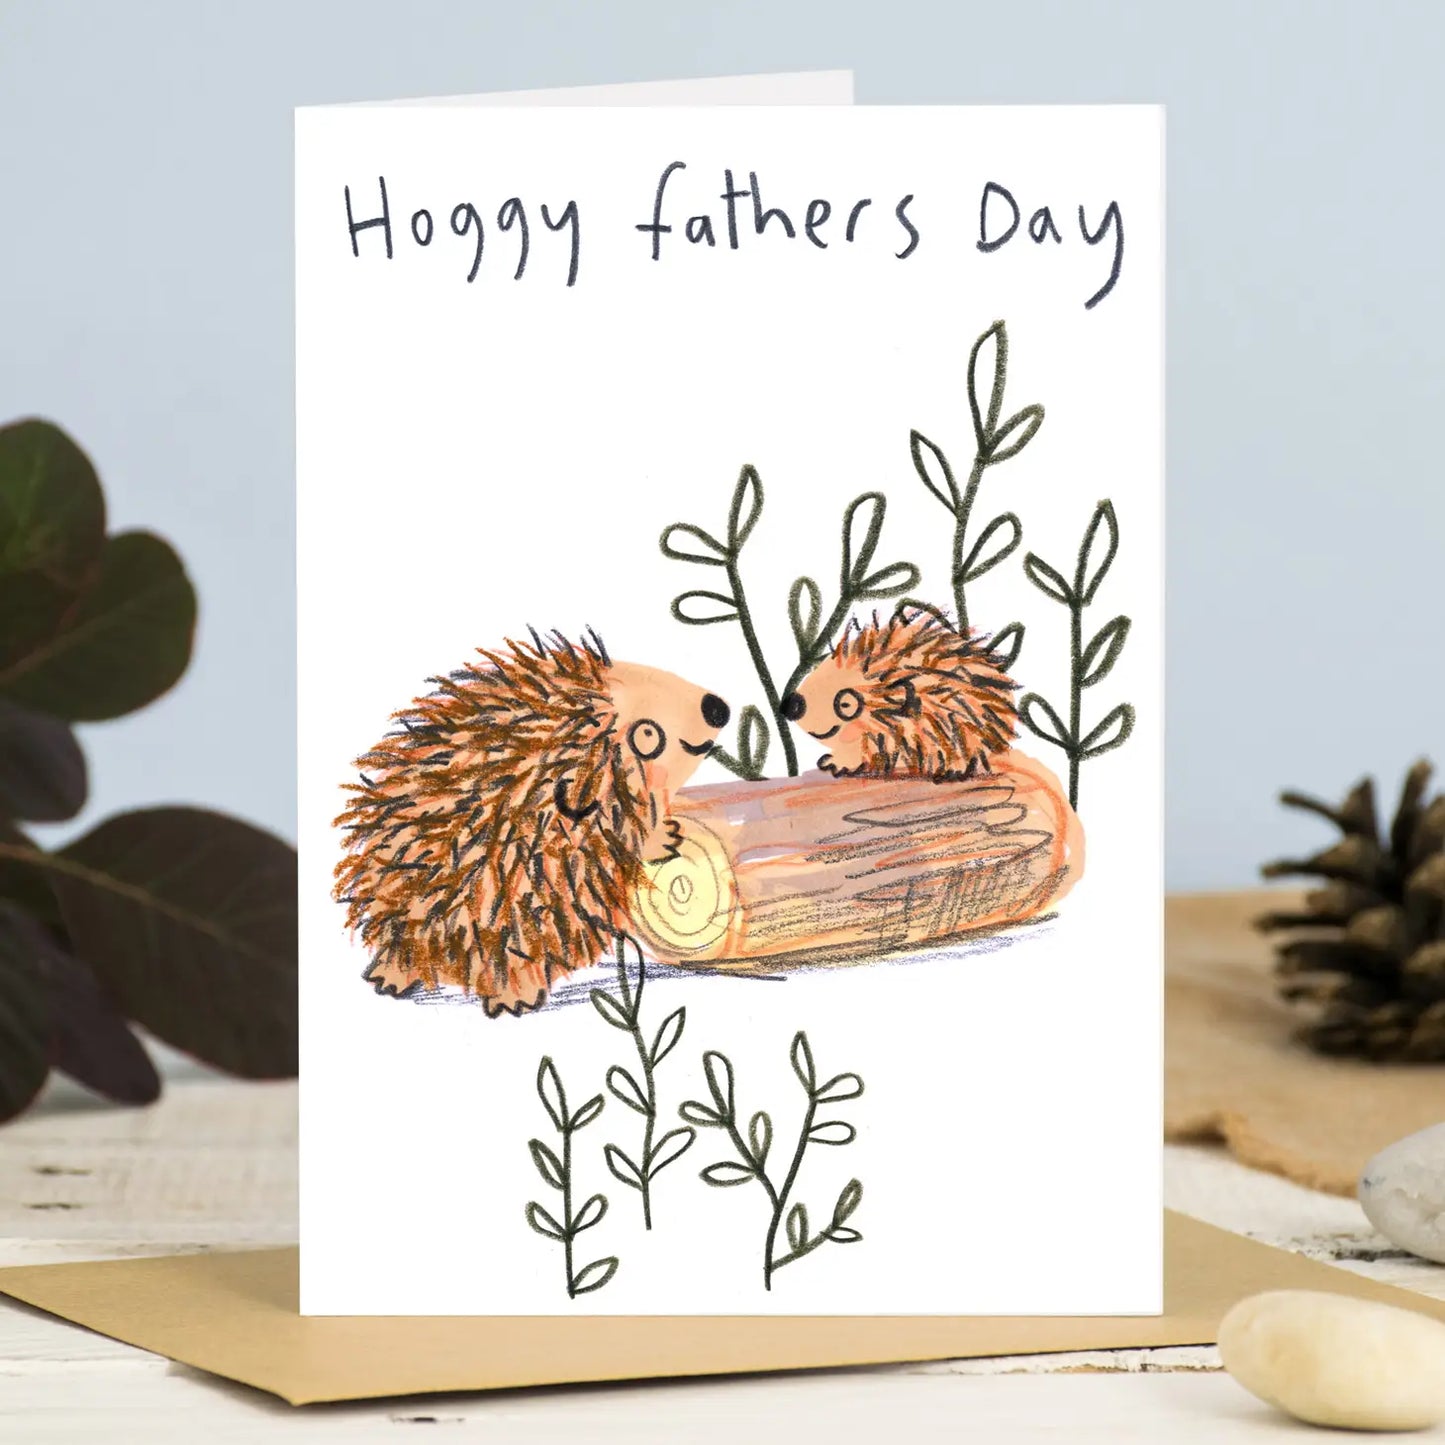 Hoggy Father's Day Card